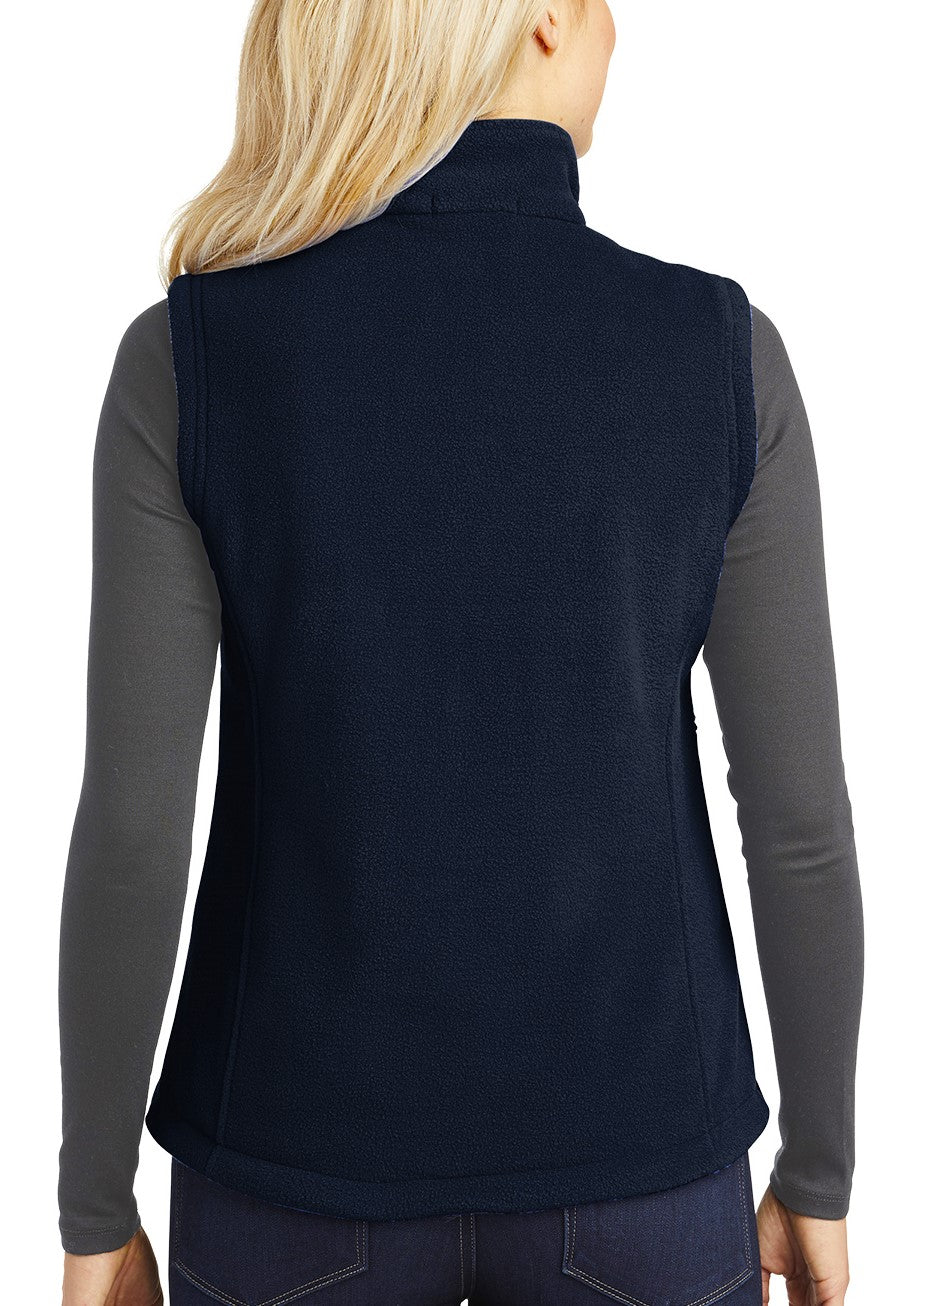 canyon fleece vest with zipper for ladies in navy blue color